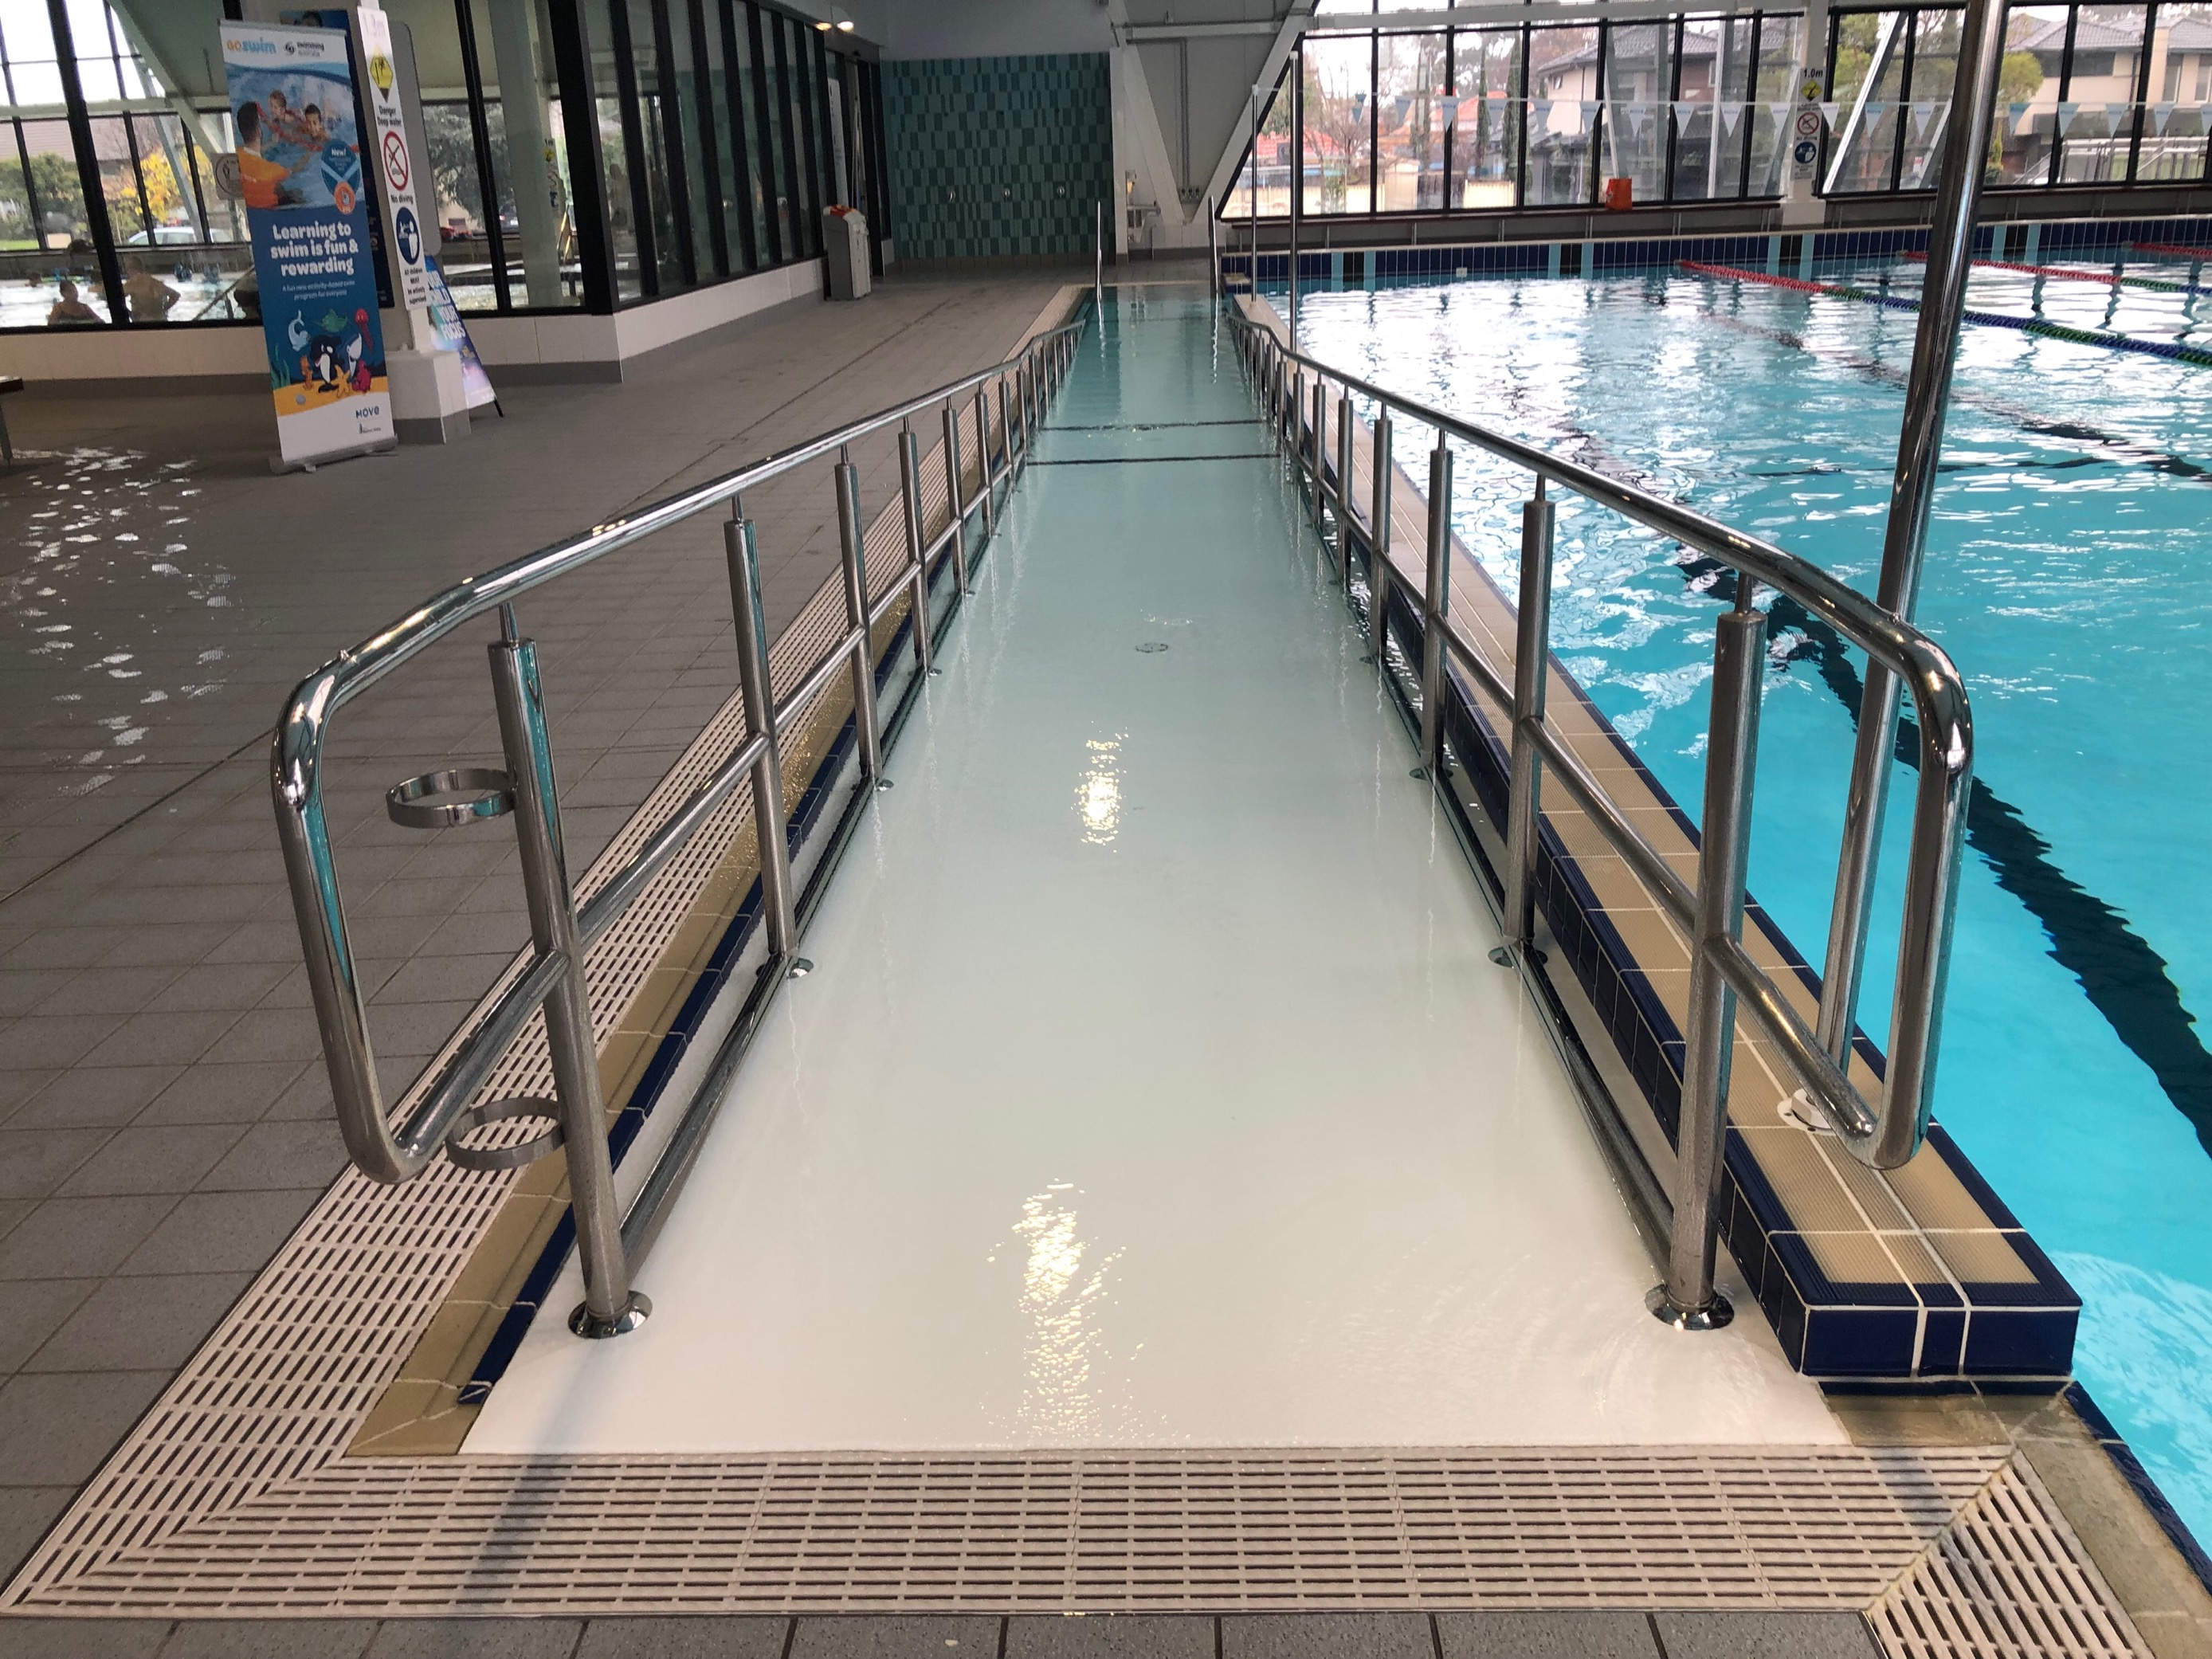 Image of 25m pool with ramp access and hand rails